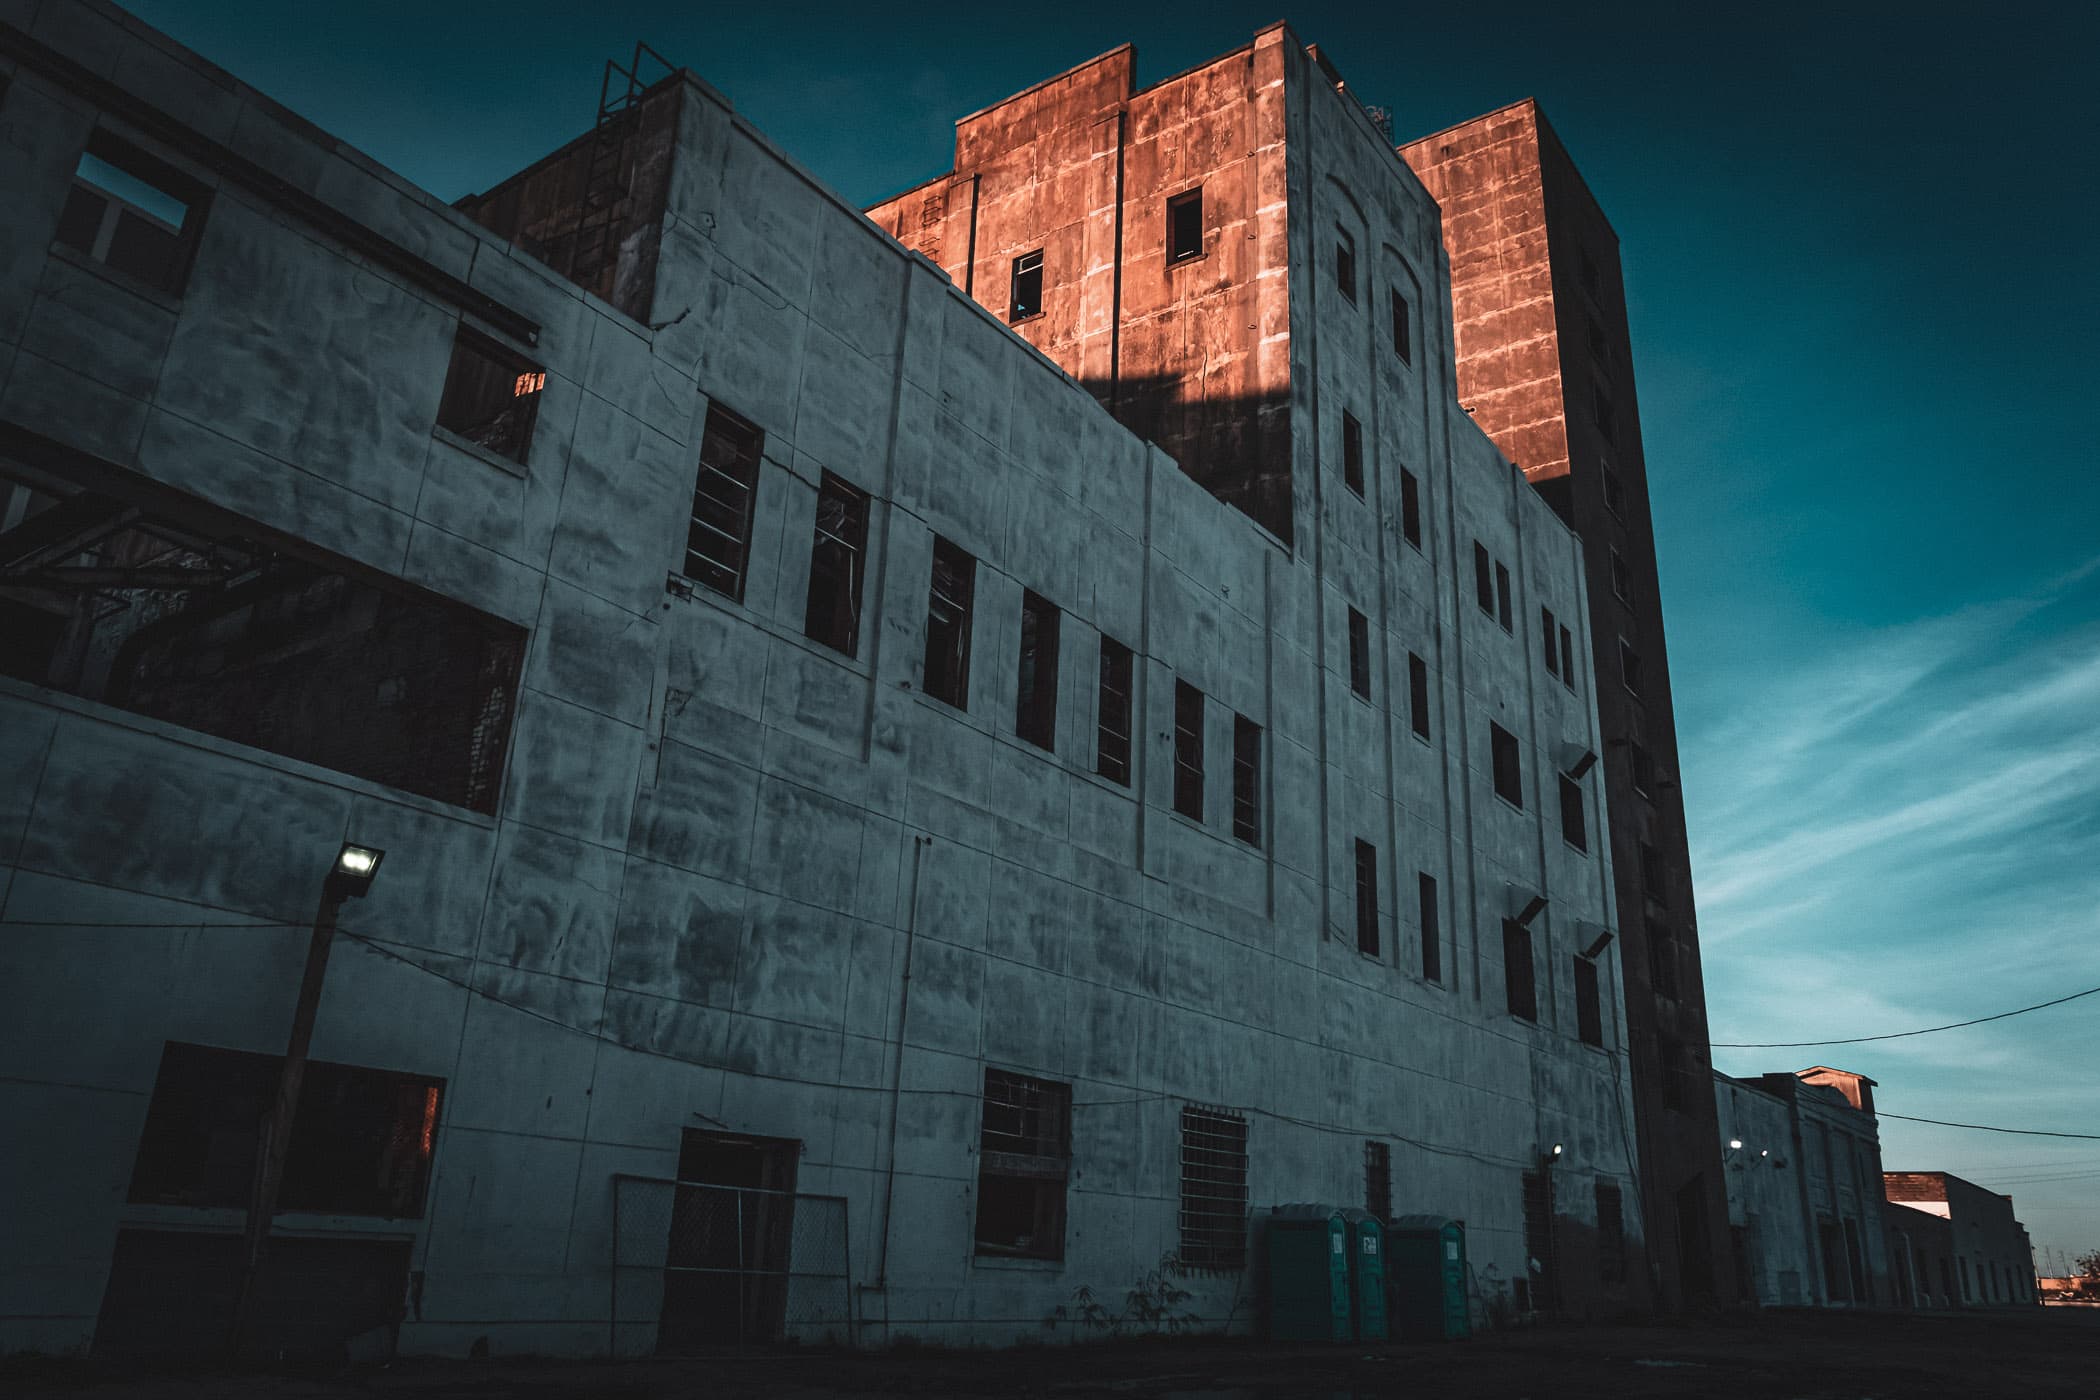 An abandoned Falstaff Beer brewery slowly decays in Galveston, Texas.